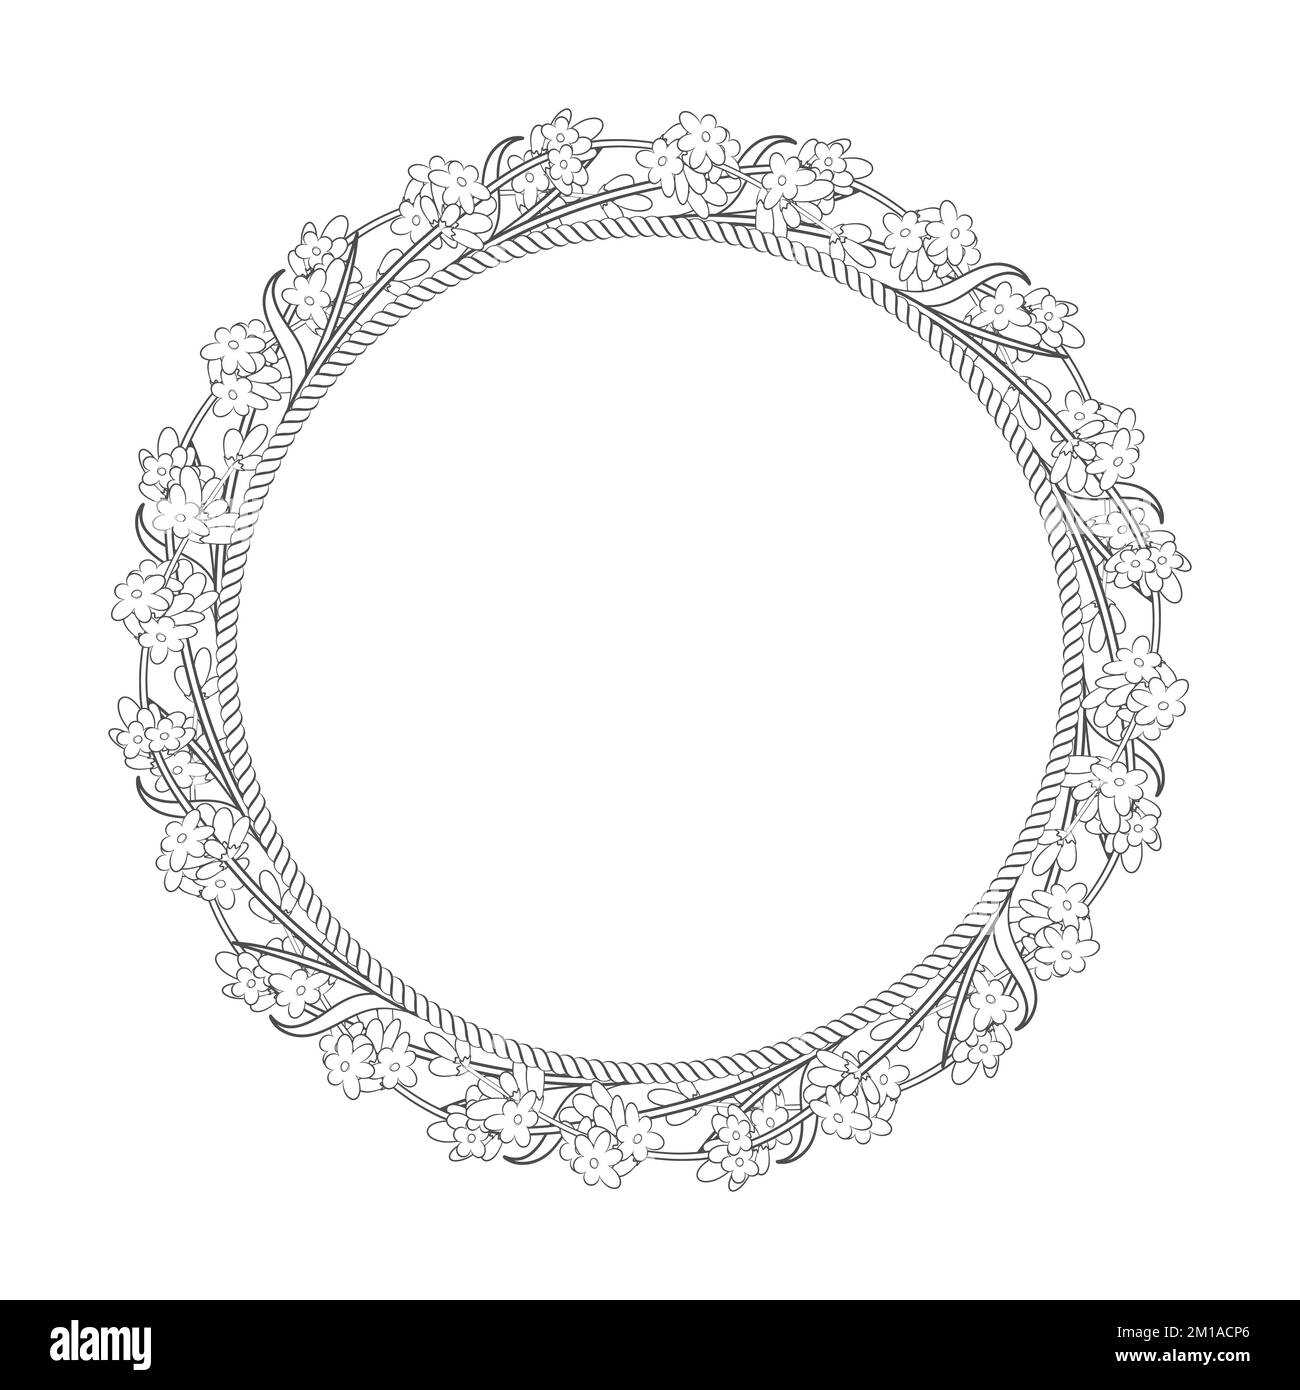 Round frame of rope with branches and flowers of lavender. Black and white vector illustration on a white background. Stock Vector